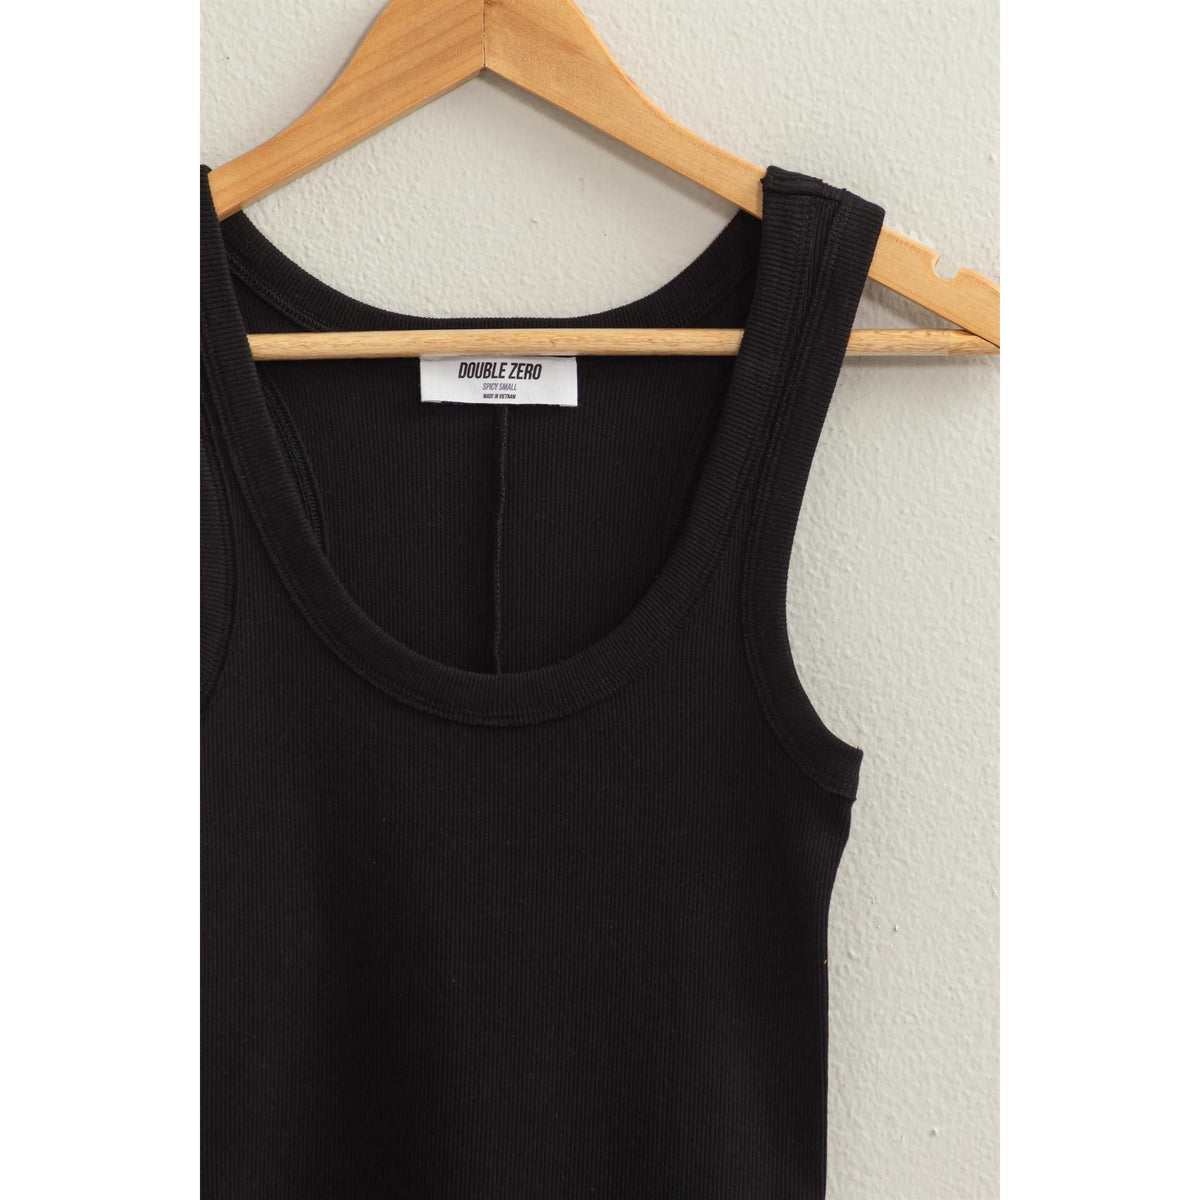 Scoop Neck Ribbed Tank (Multiple Colors Available)